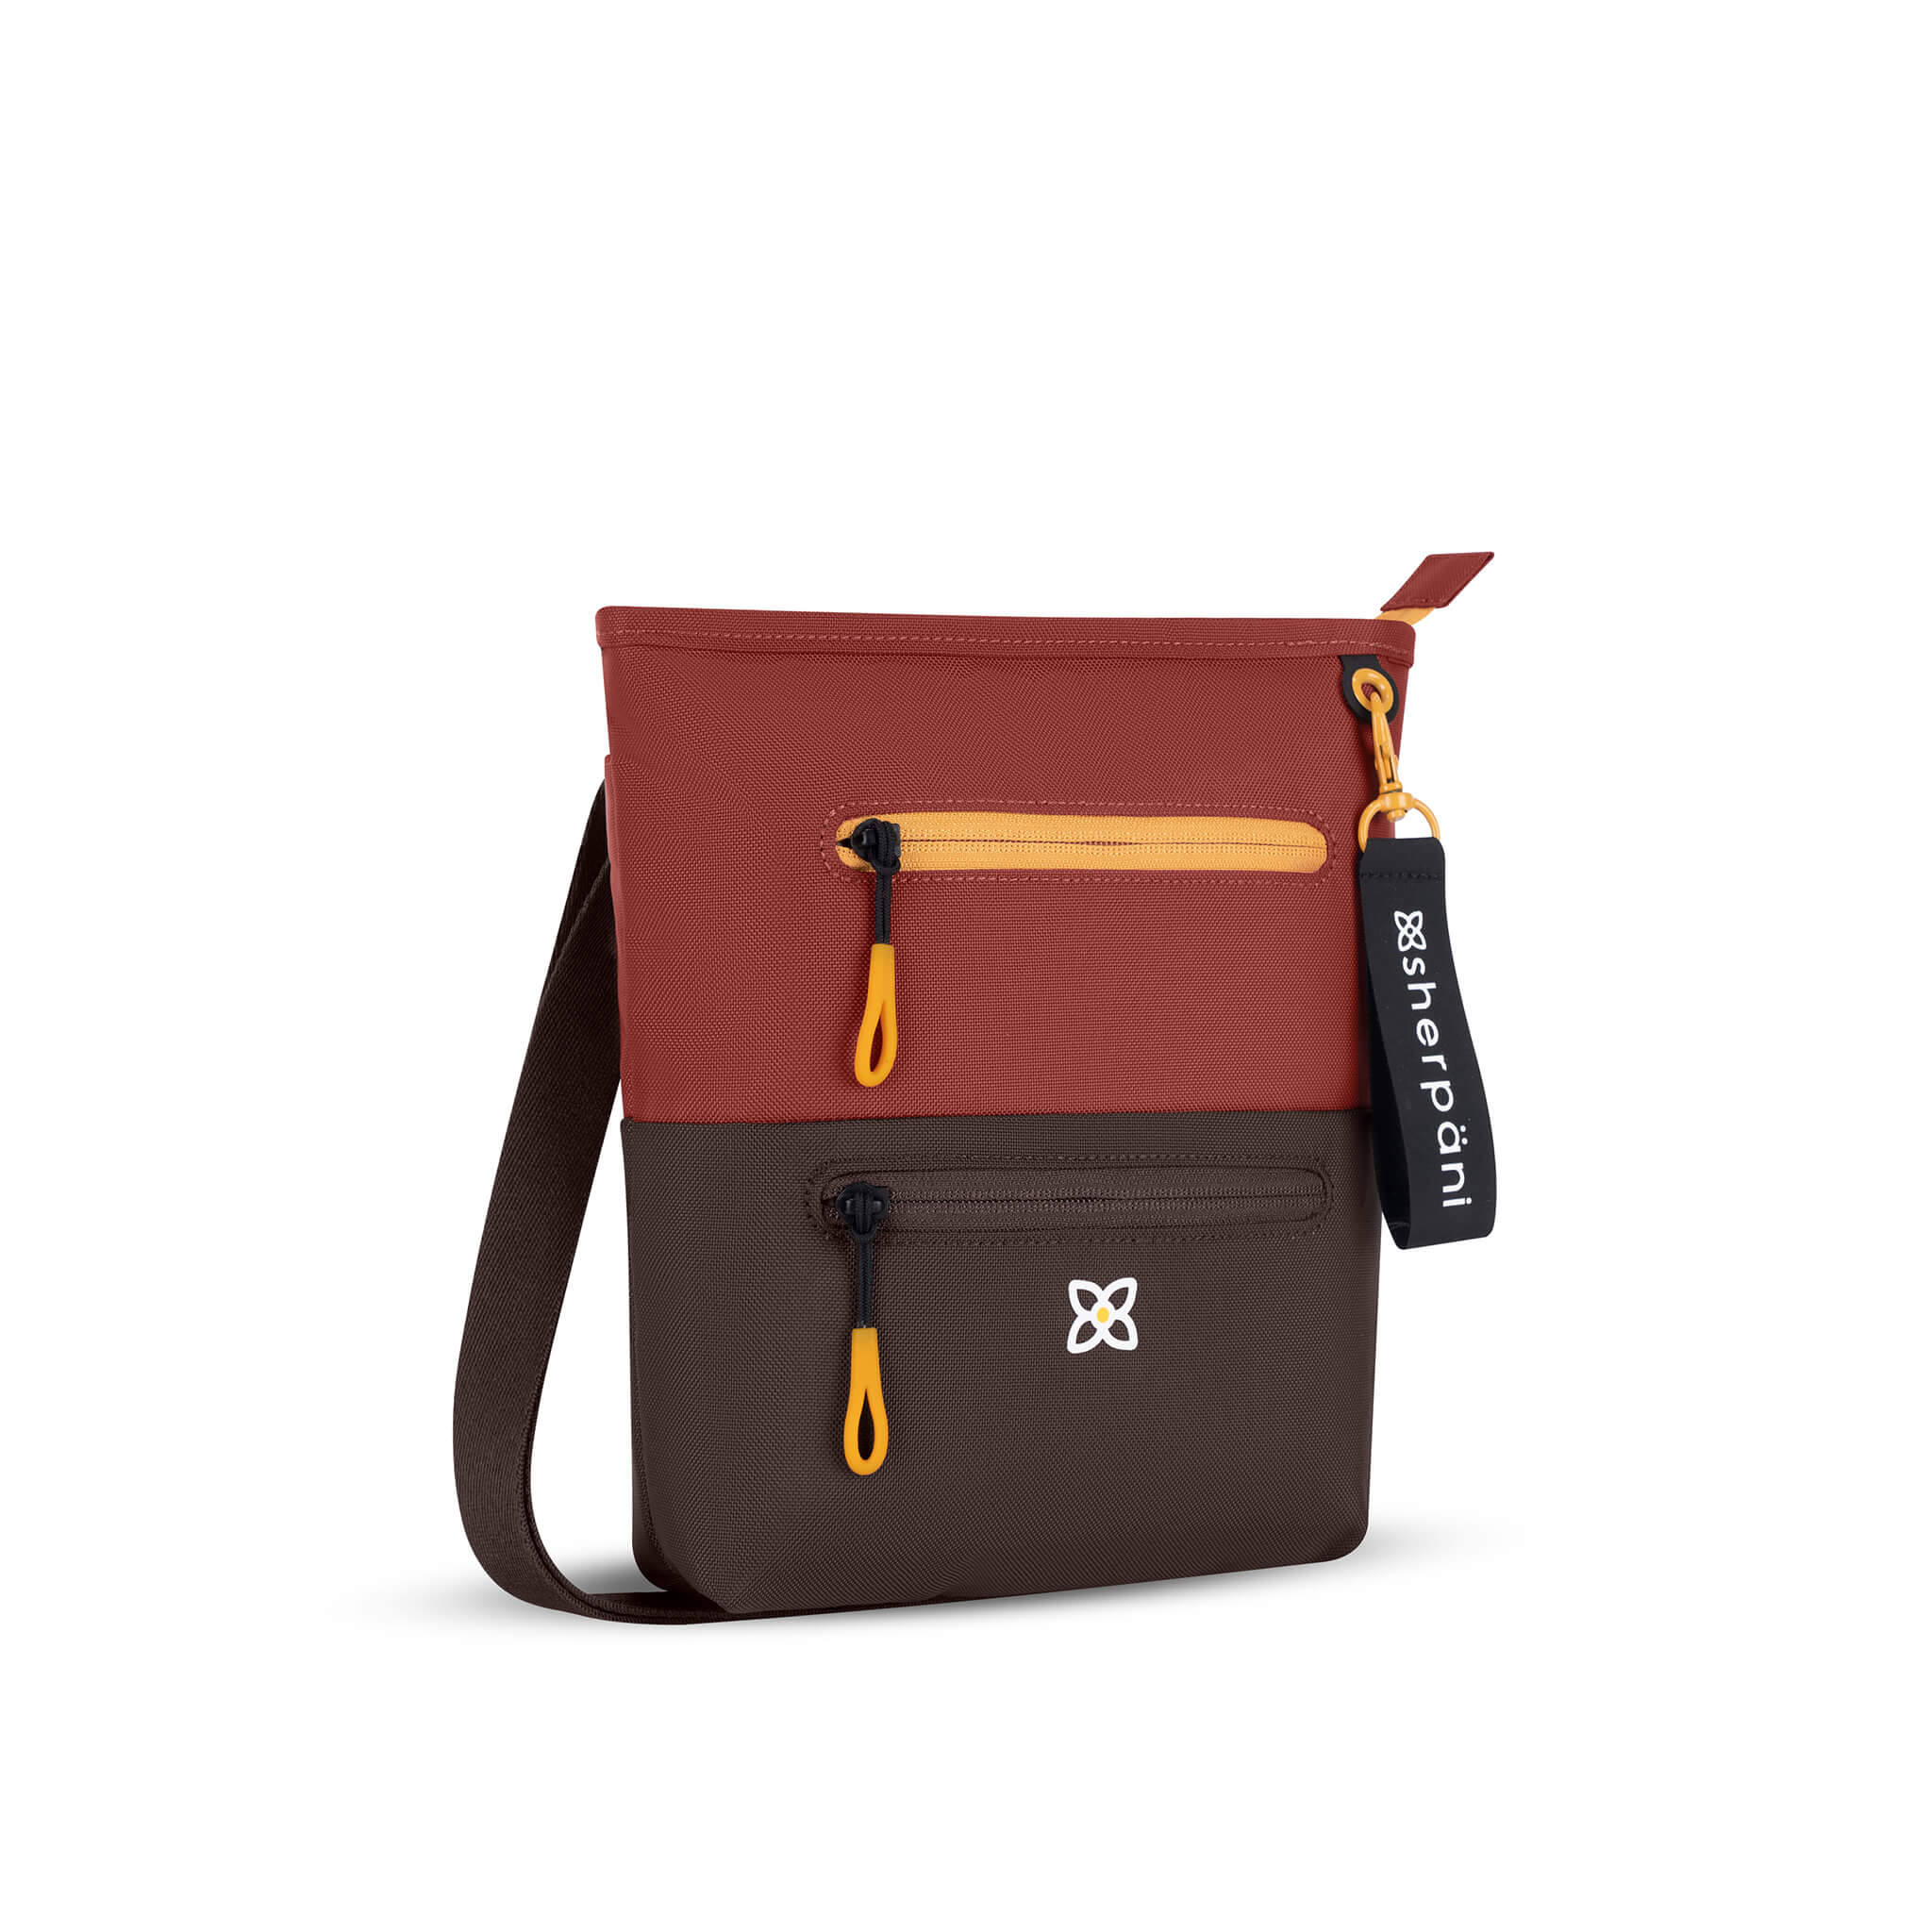 Angled front view of Sherpani crossbody travel bag, the Sadie in Cider. Sadie features include two front zipper pockets, a discrete side pocket, detachable keychain, adjustable crossbody strap, back slip pocket and RFID blocking technology. The Cider color is two-toned in burgundy and dark brown with yellow accents. #color_cider